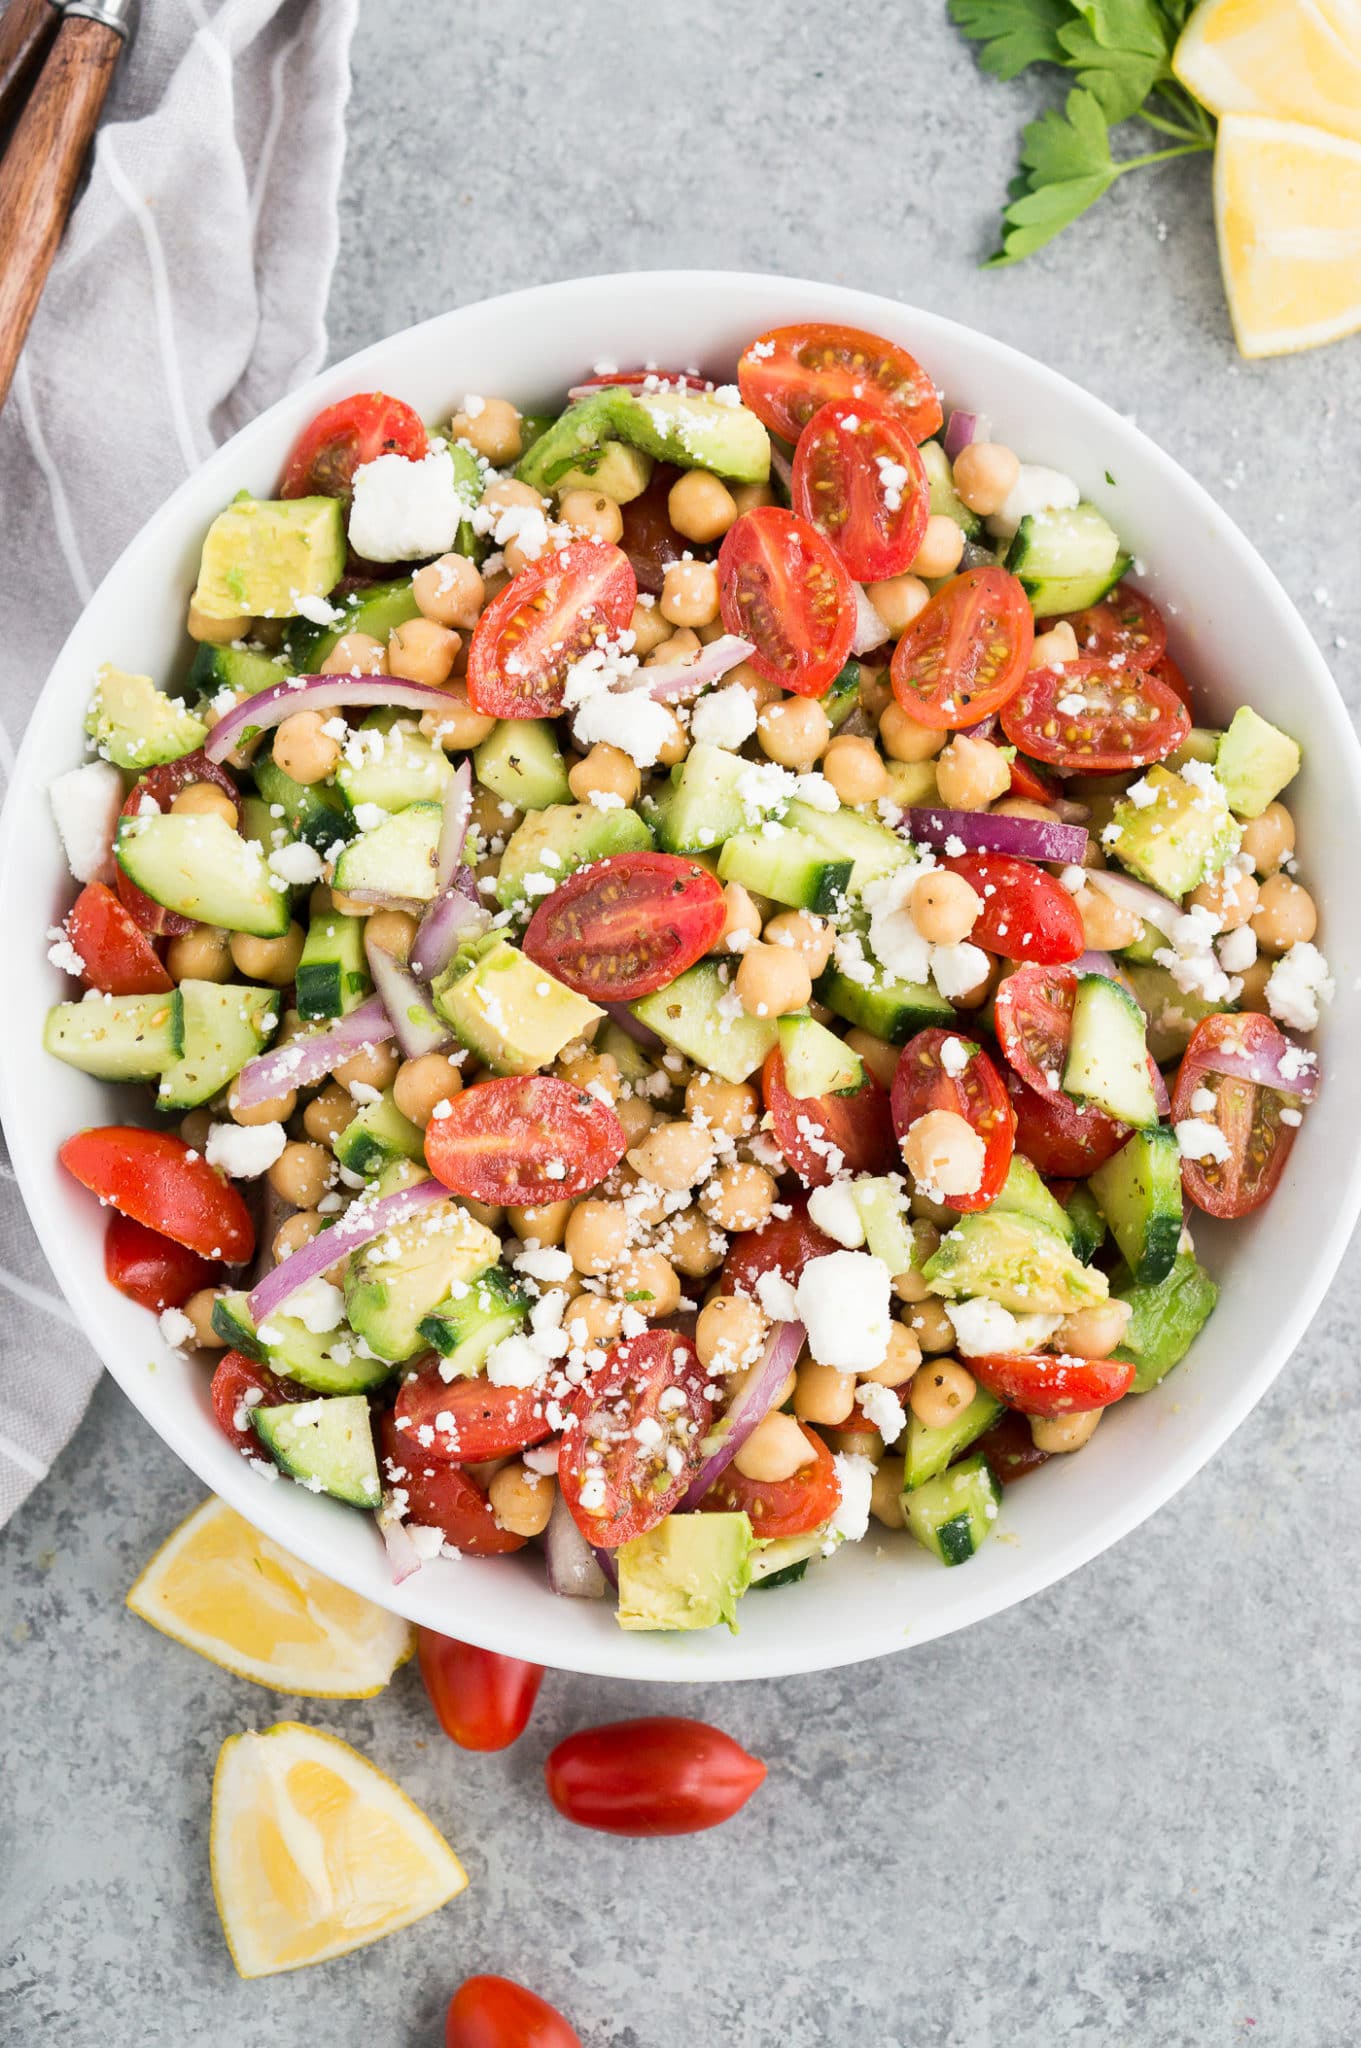 garbanzo bean salad recipe with tomatoes and cucumbers in a bowl